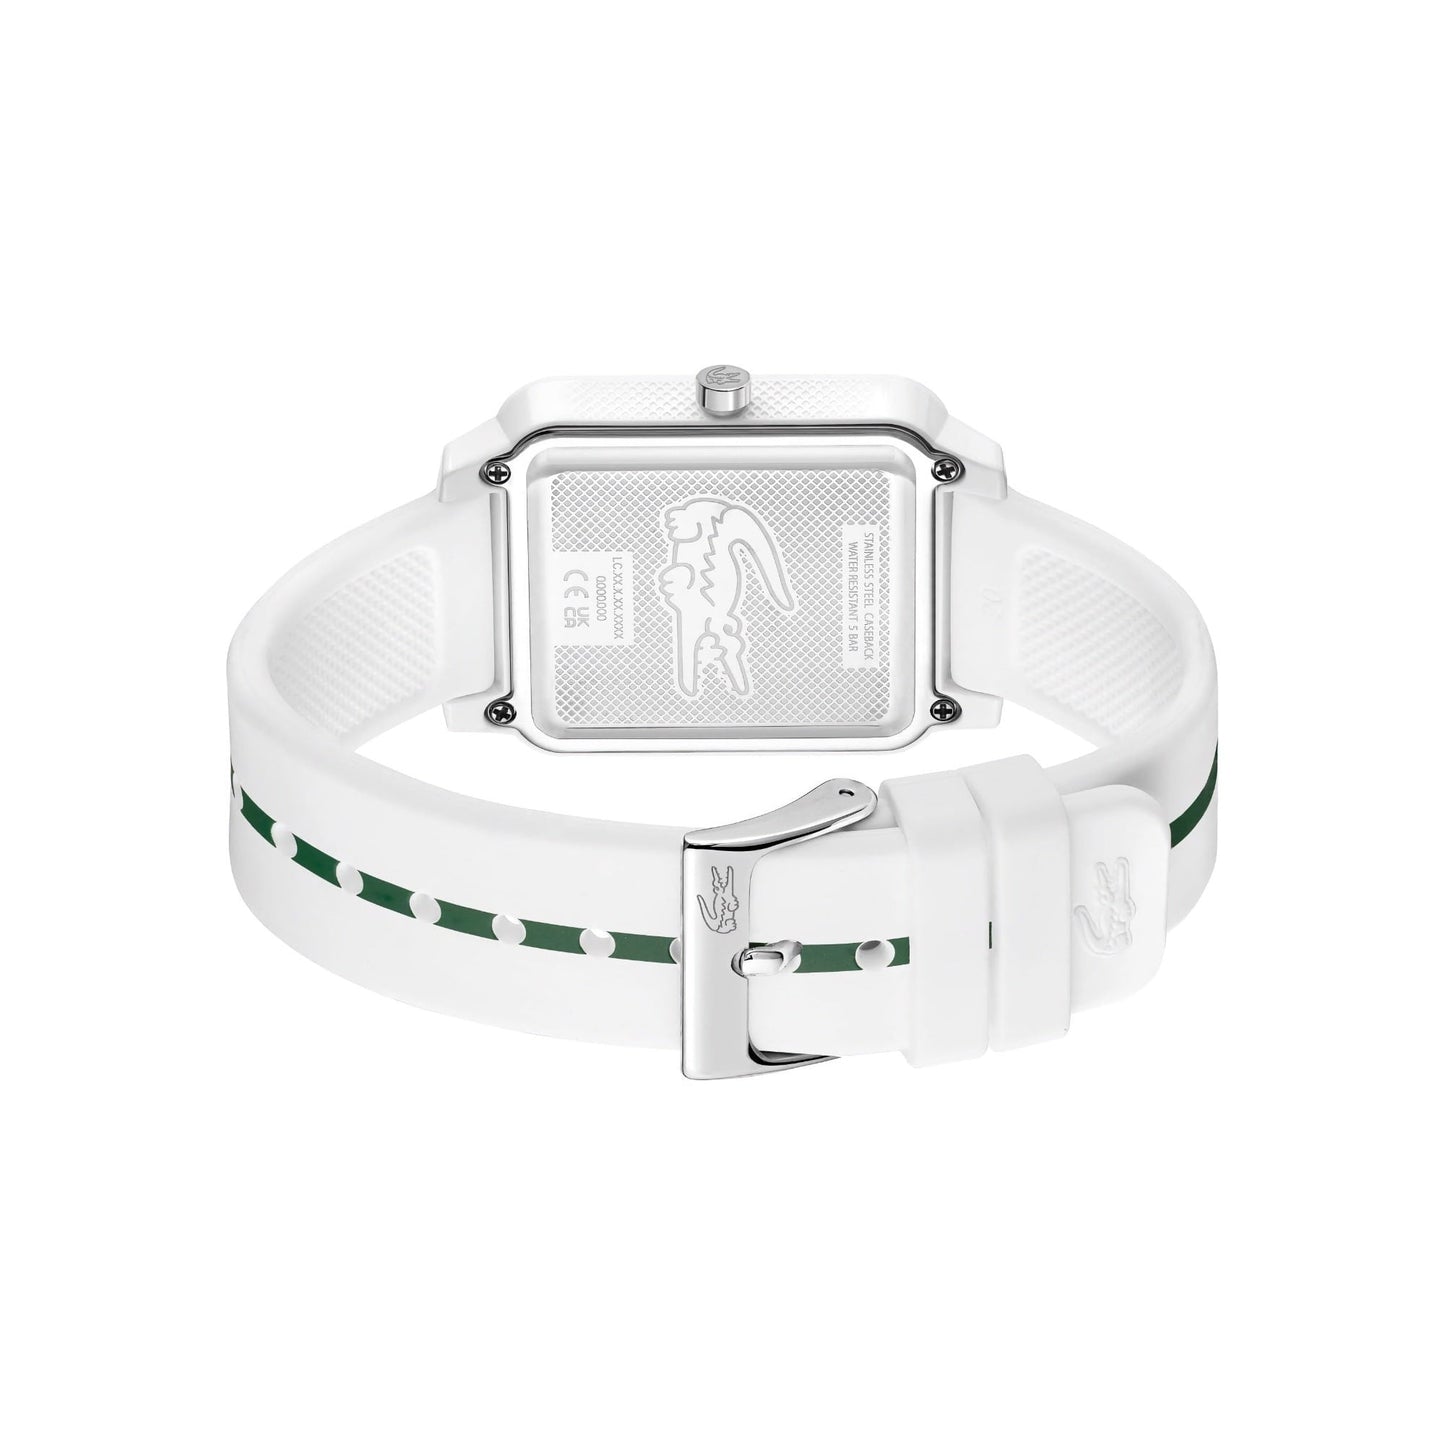 A Lacoste.12.12 Studio 3 Hands Watch White Silicone with green straps on a white background.